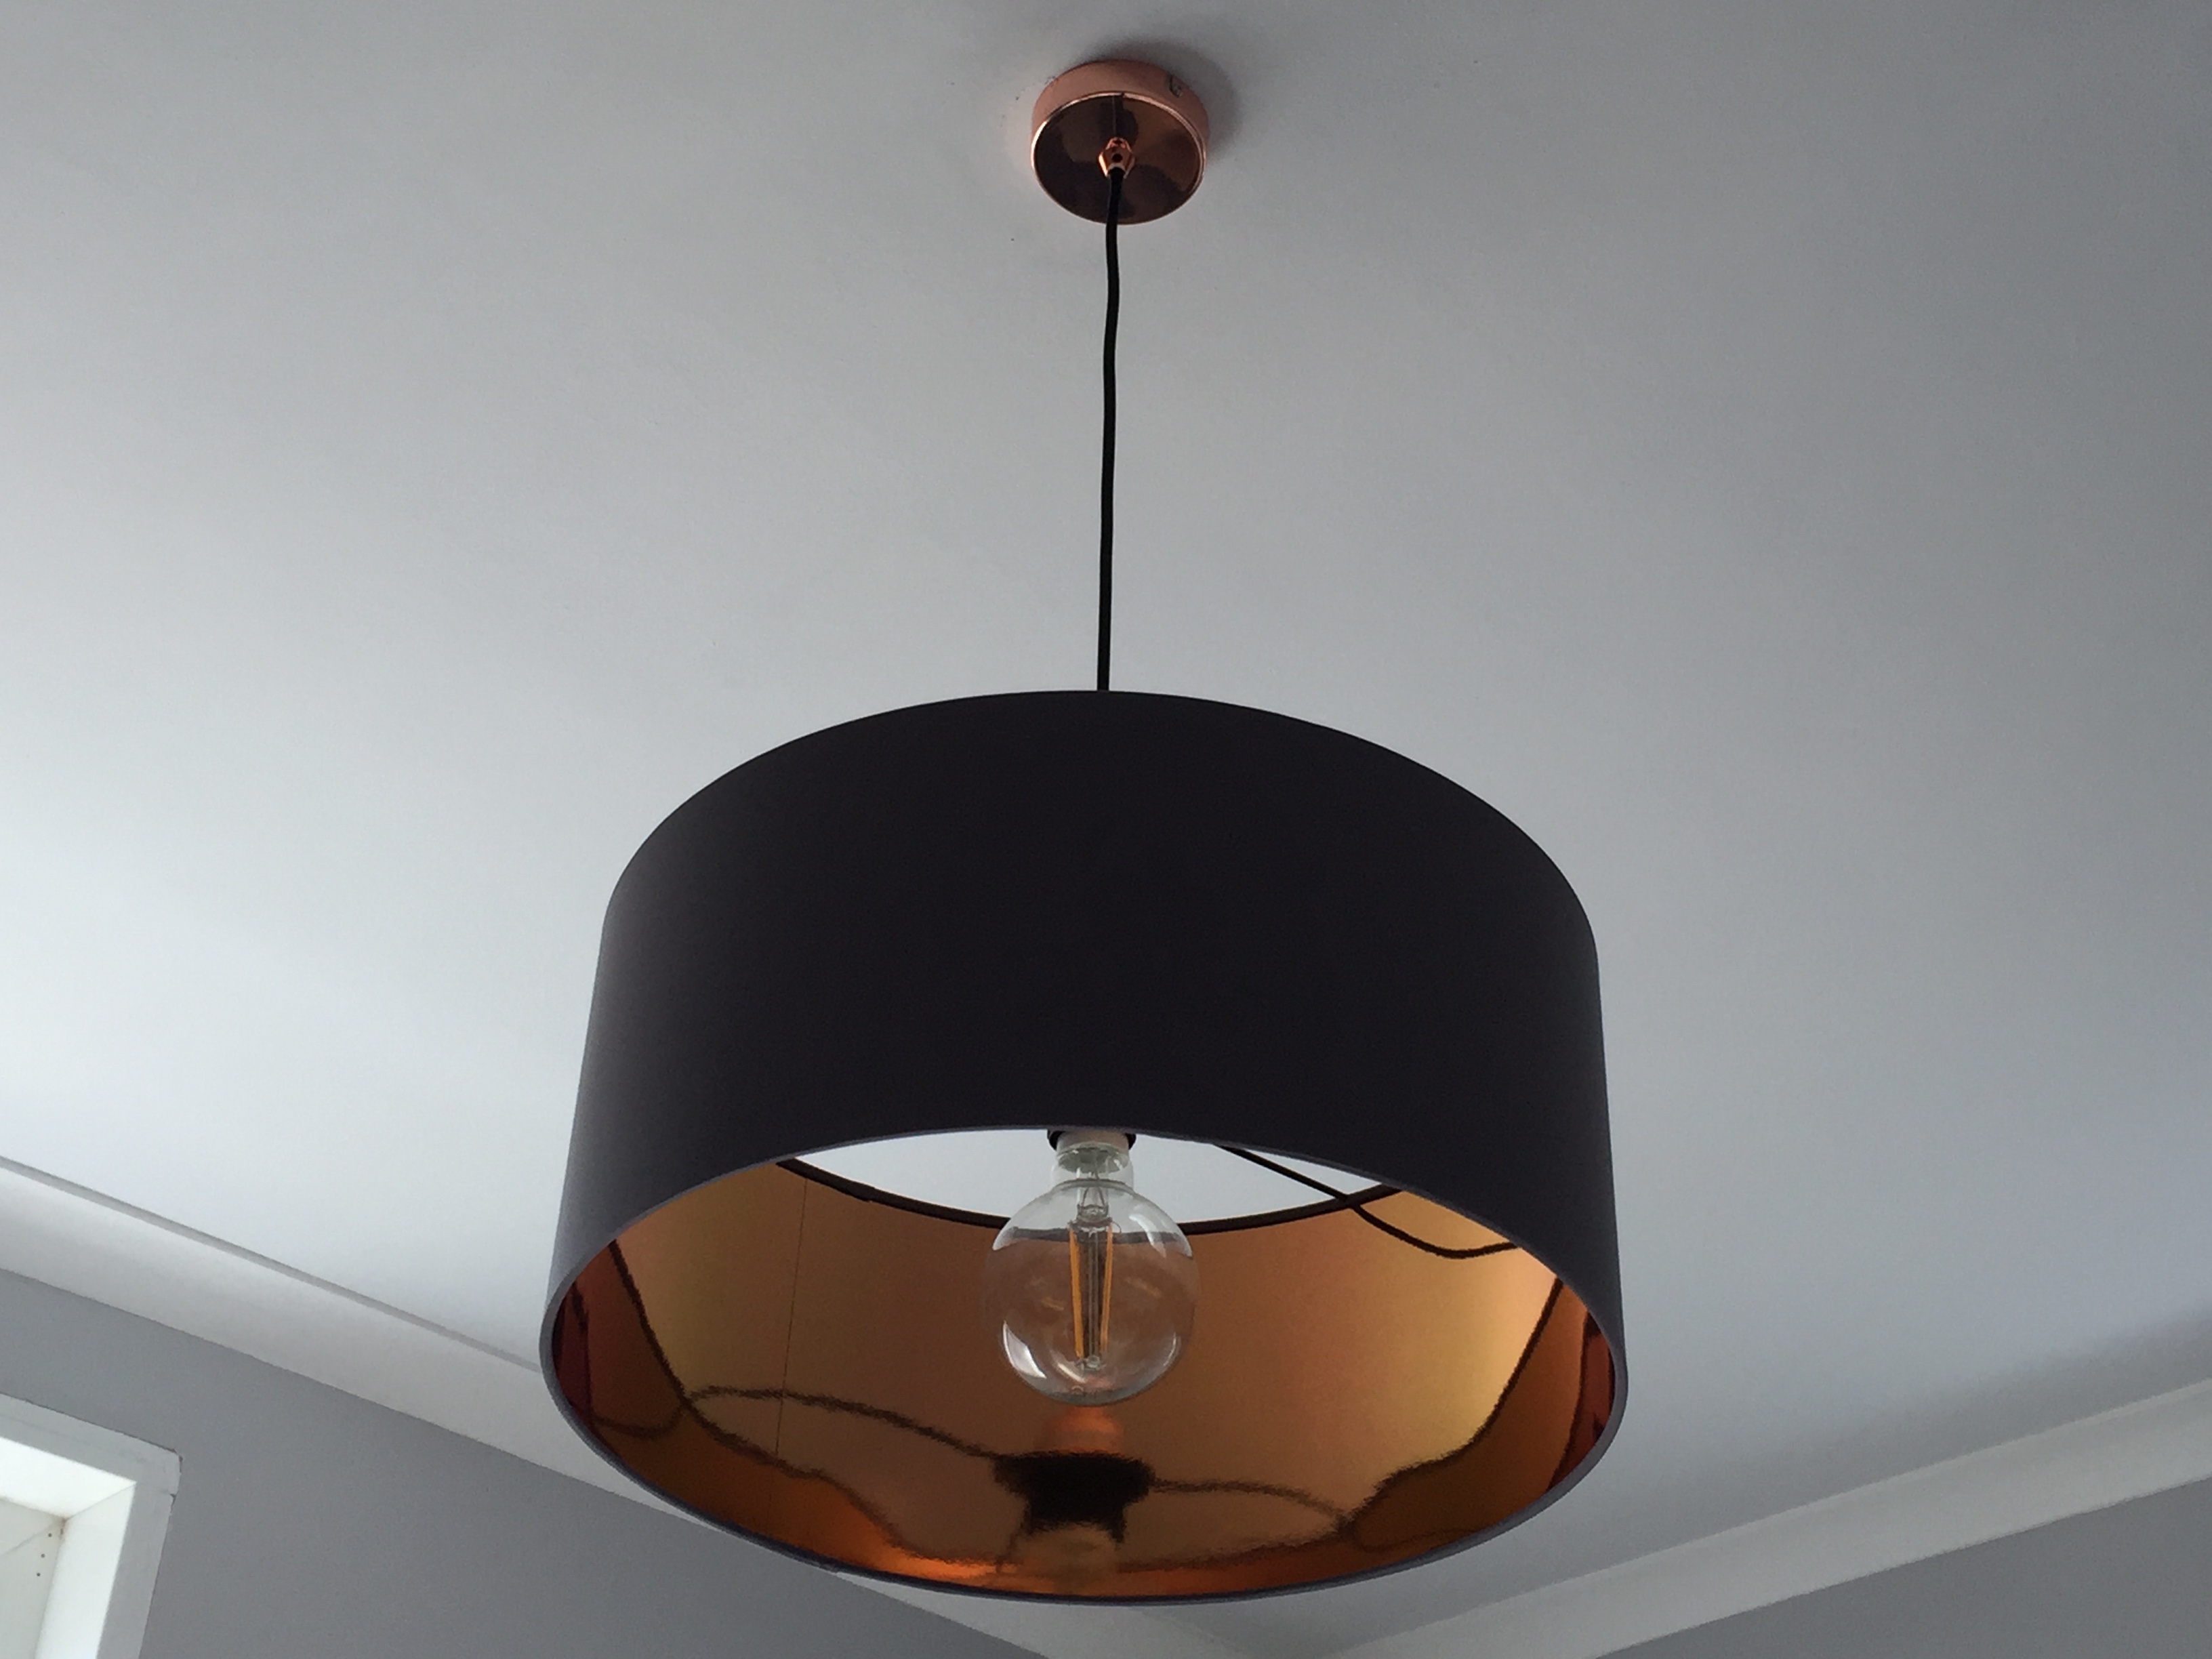 New pendant light fitting with decorative dimmable LED lamp